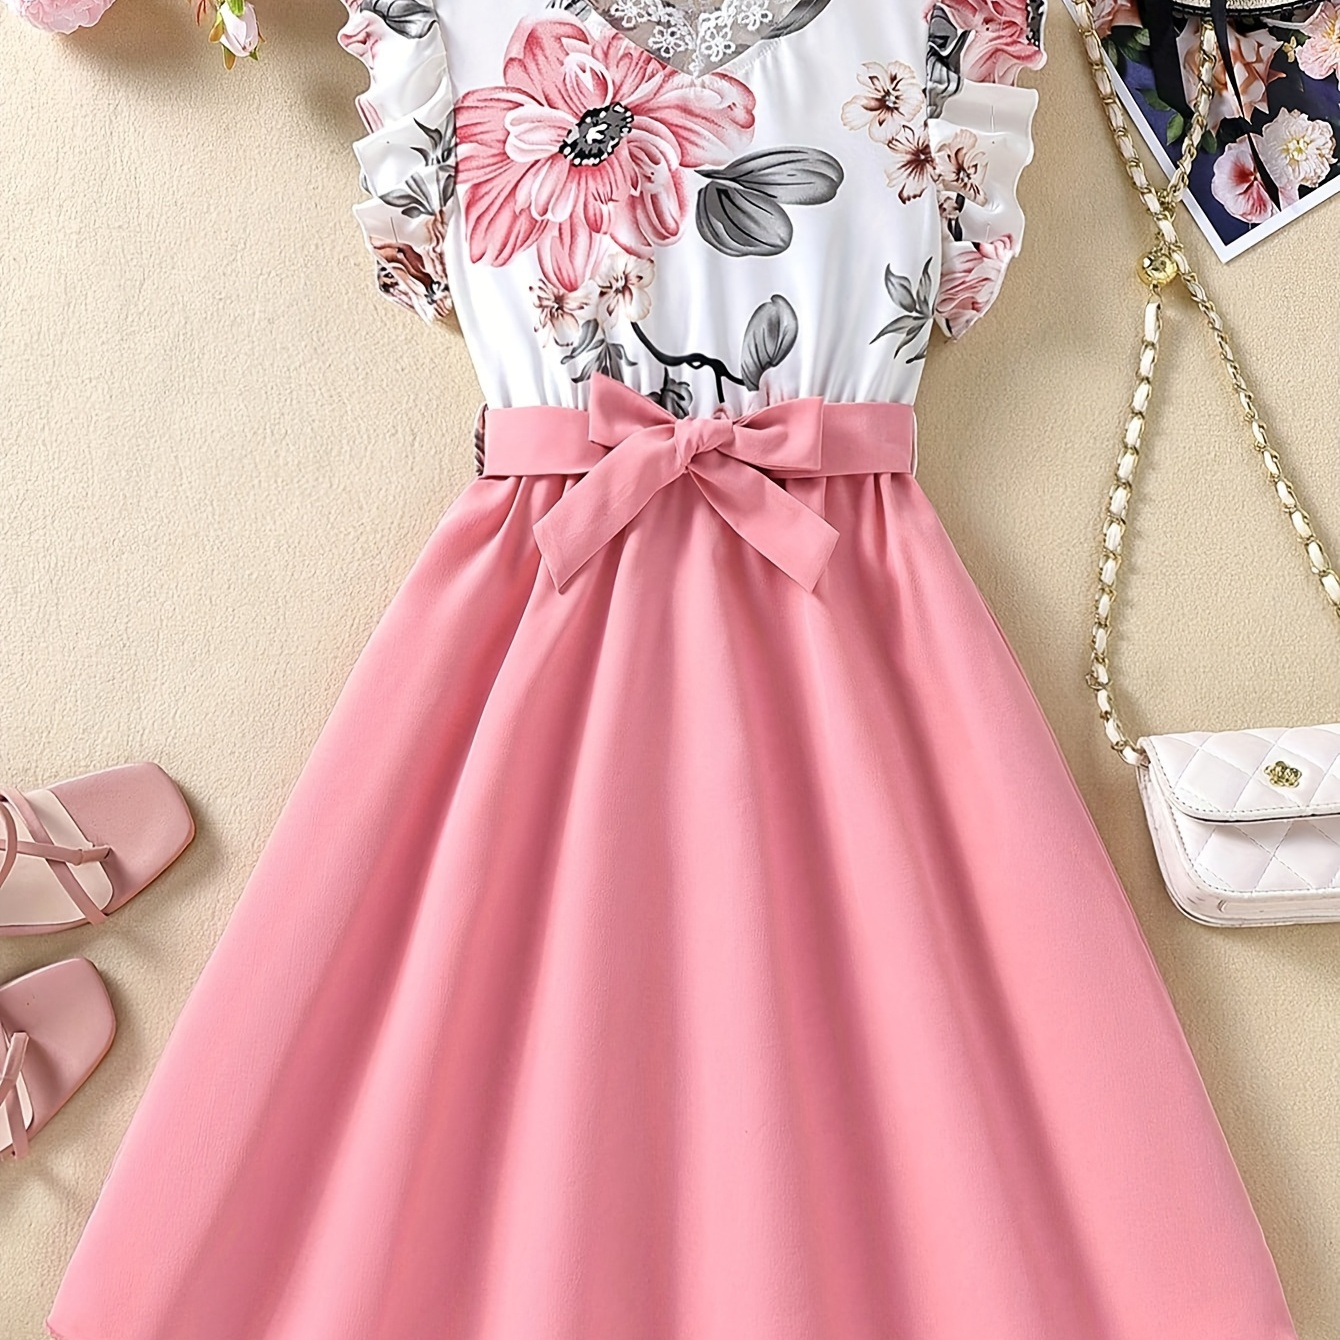 

Fashionable Floral Print Elegant Dress For Girls, Breathable Casual A-line Dress For Everyday, Summer Outfit